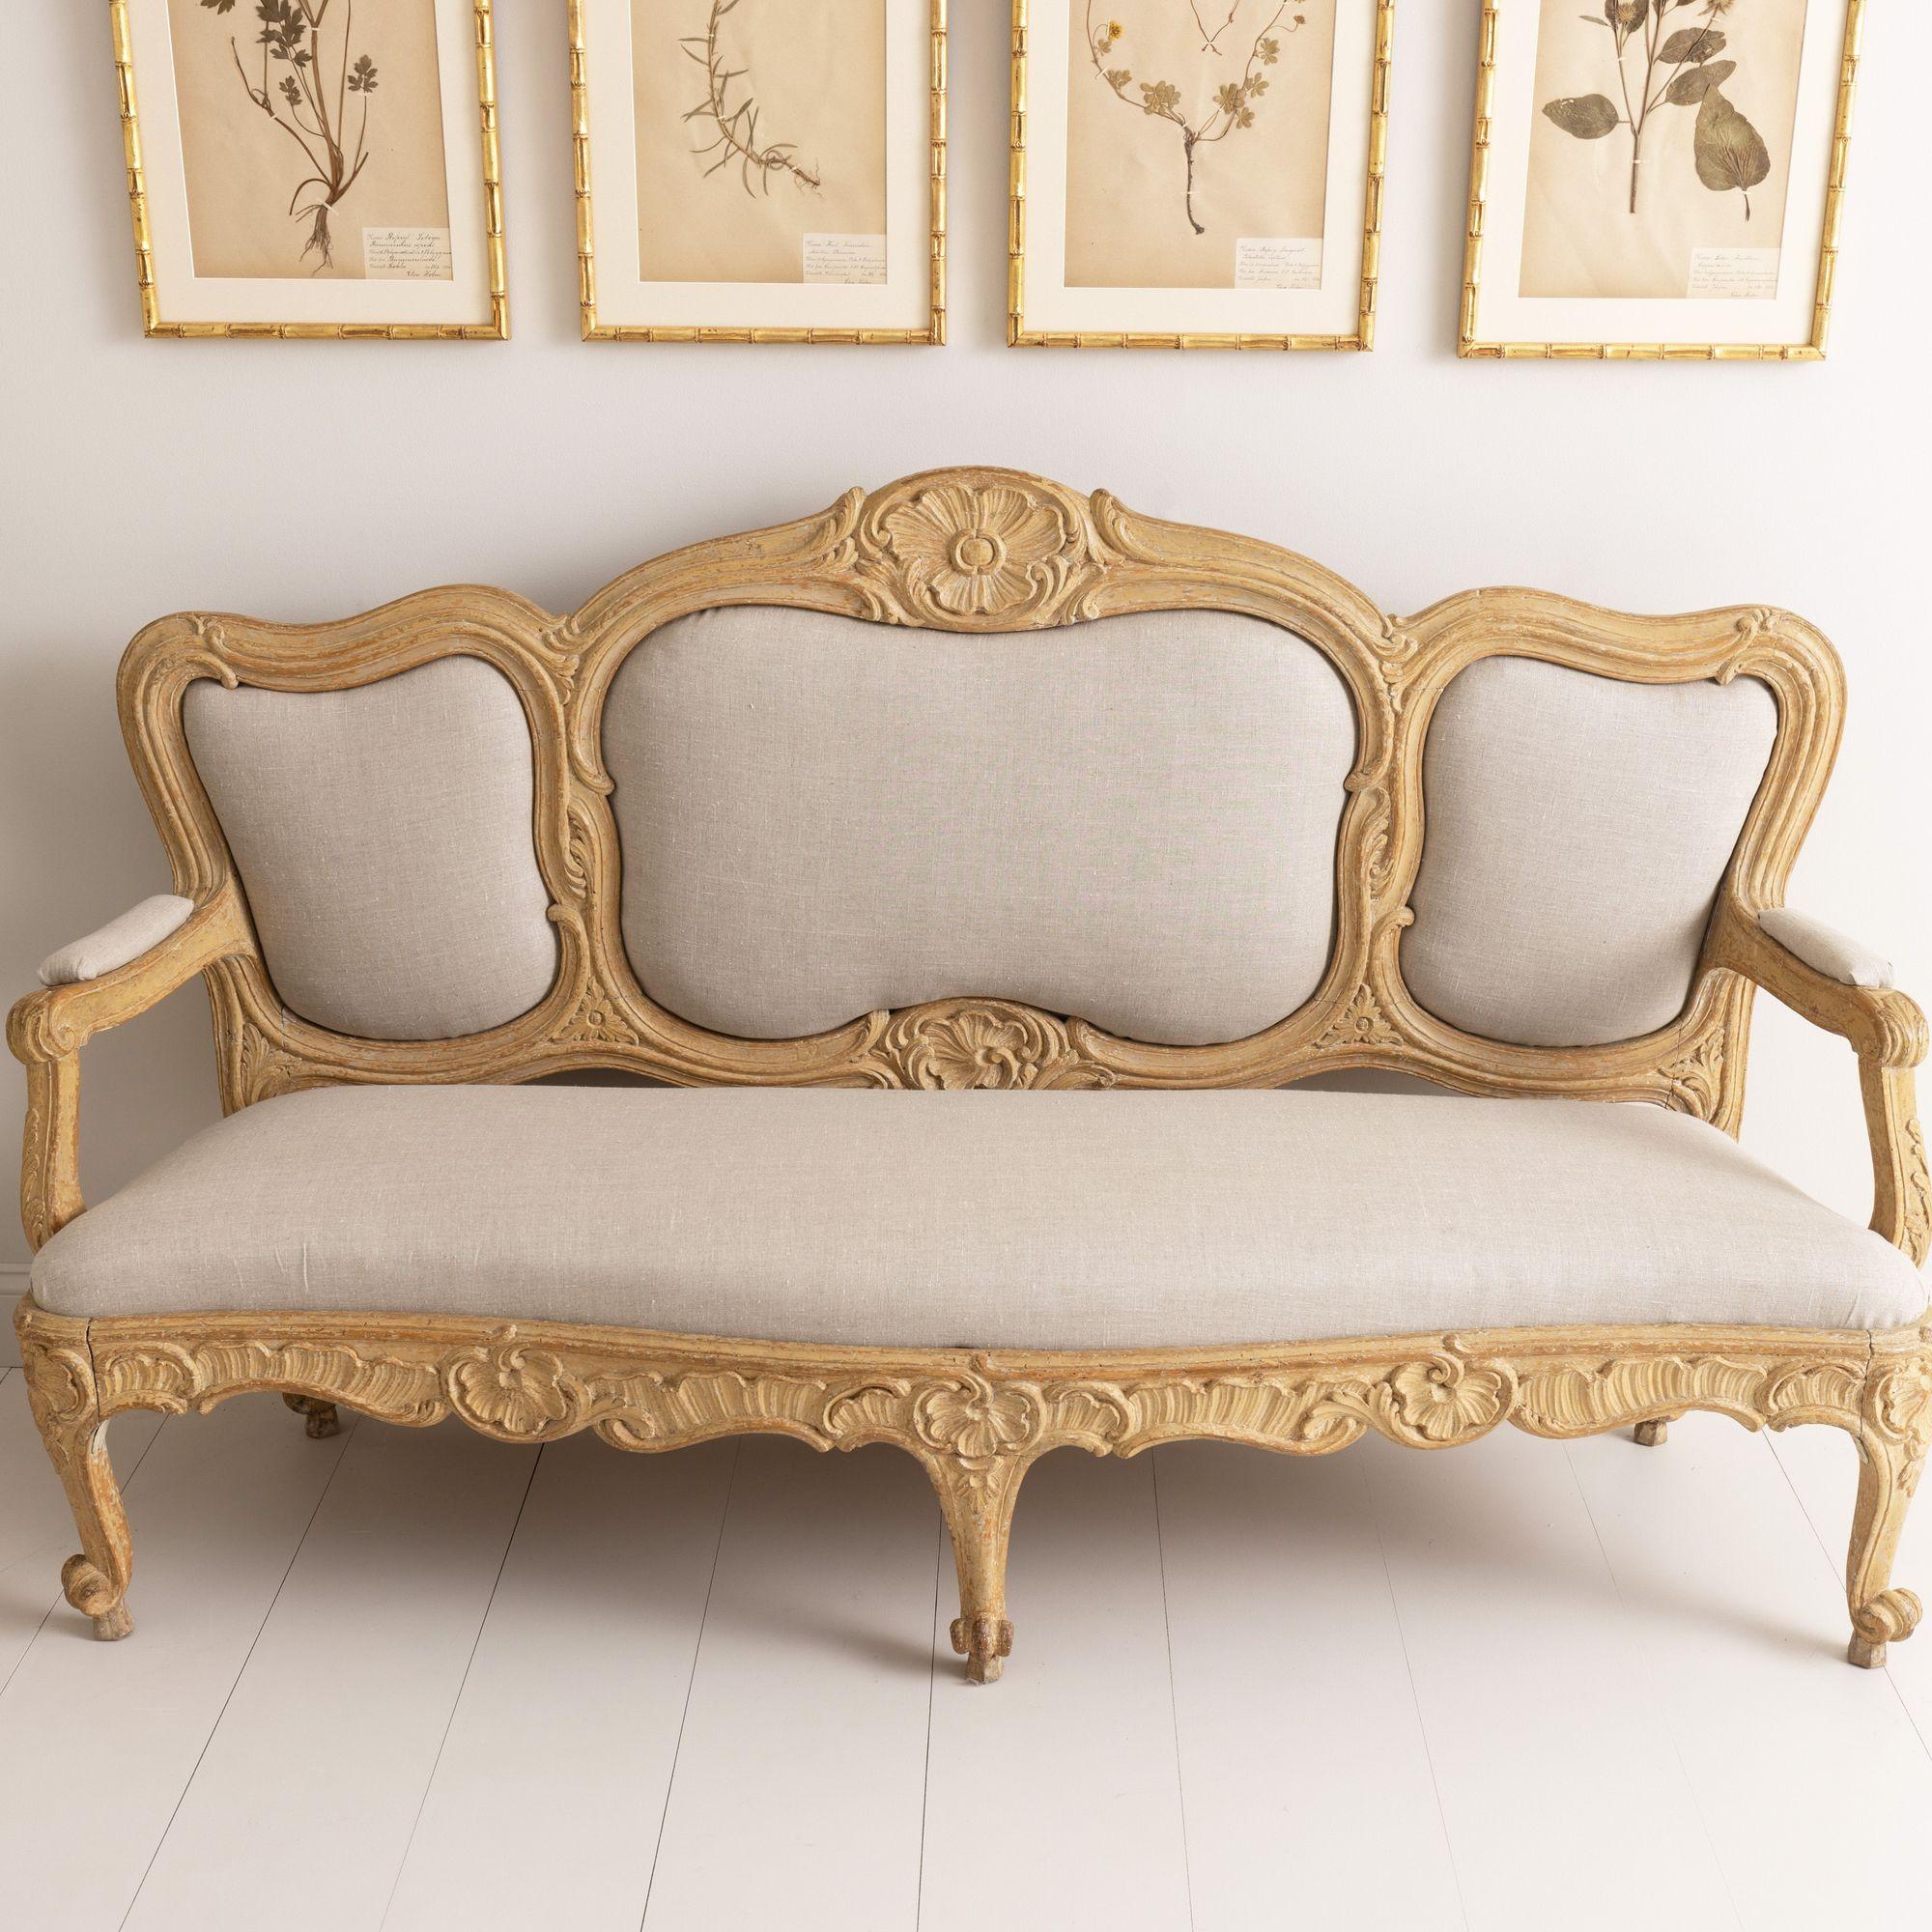 18th C. Swedish Rococo Sofa Bench in Original Paint from Stockholm 5